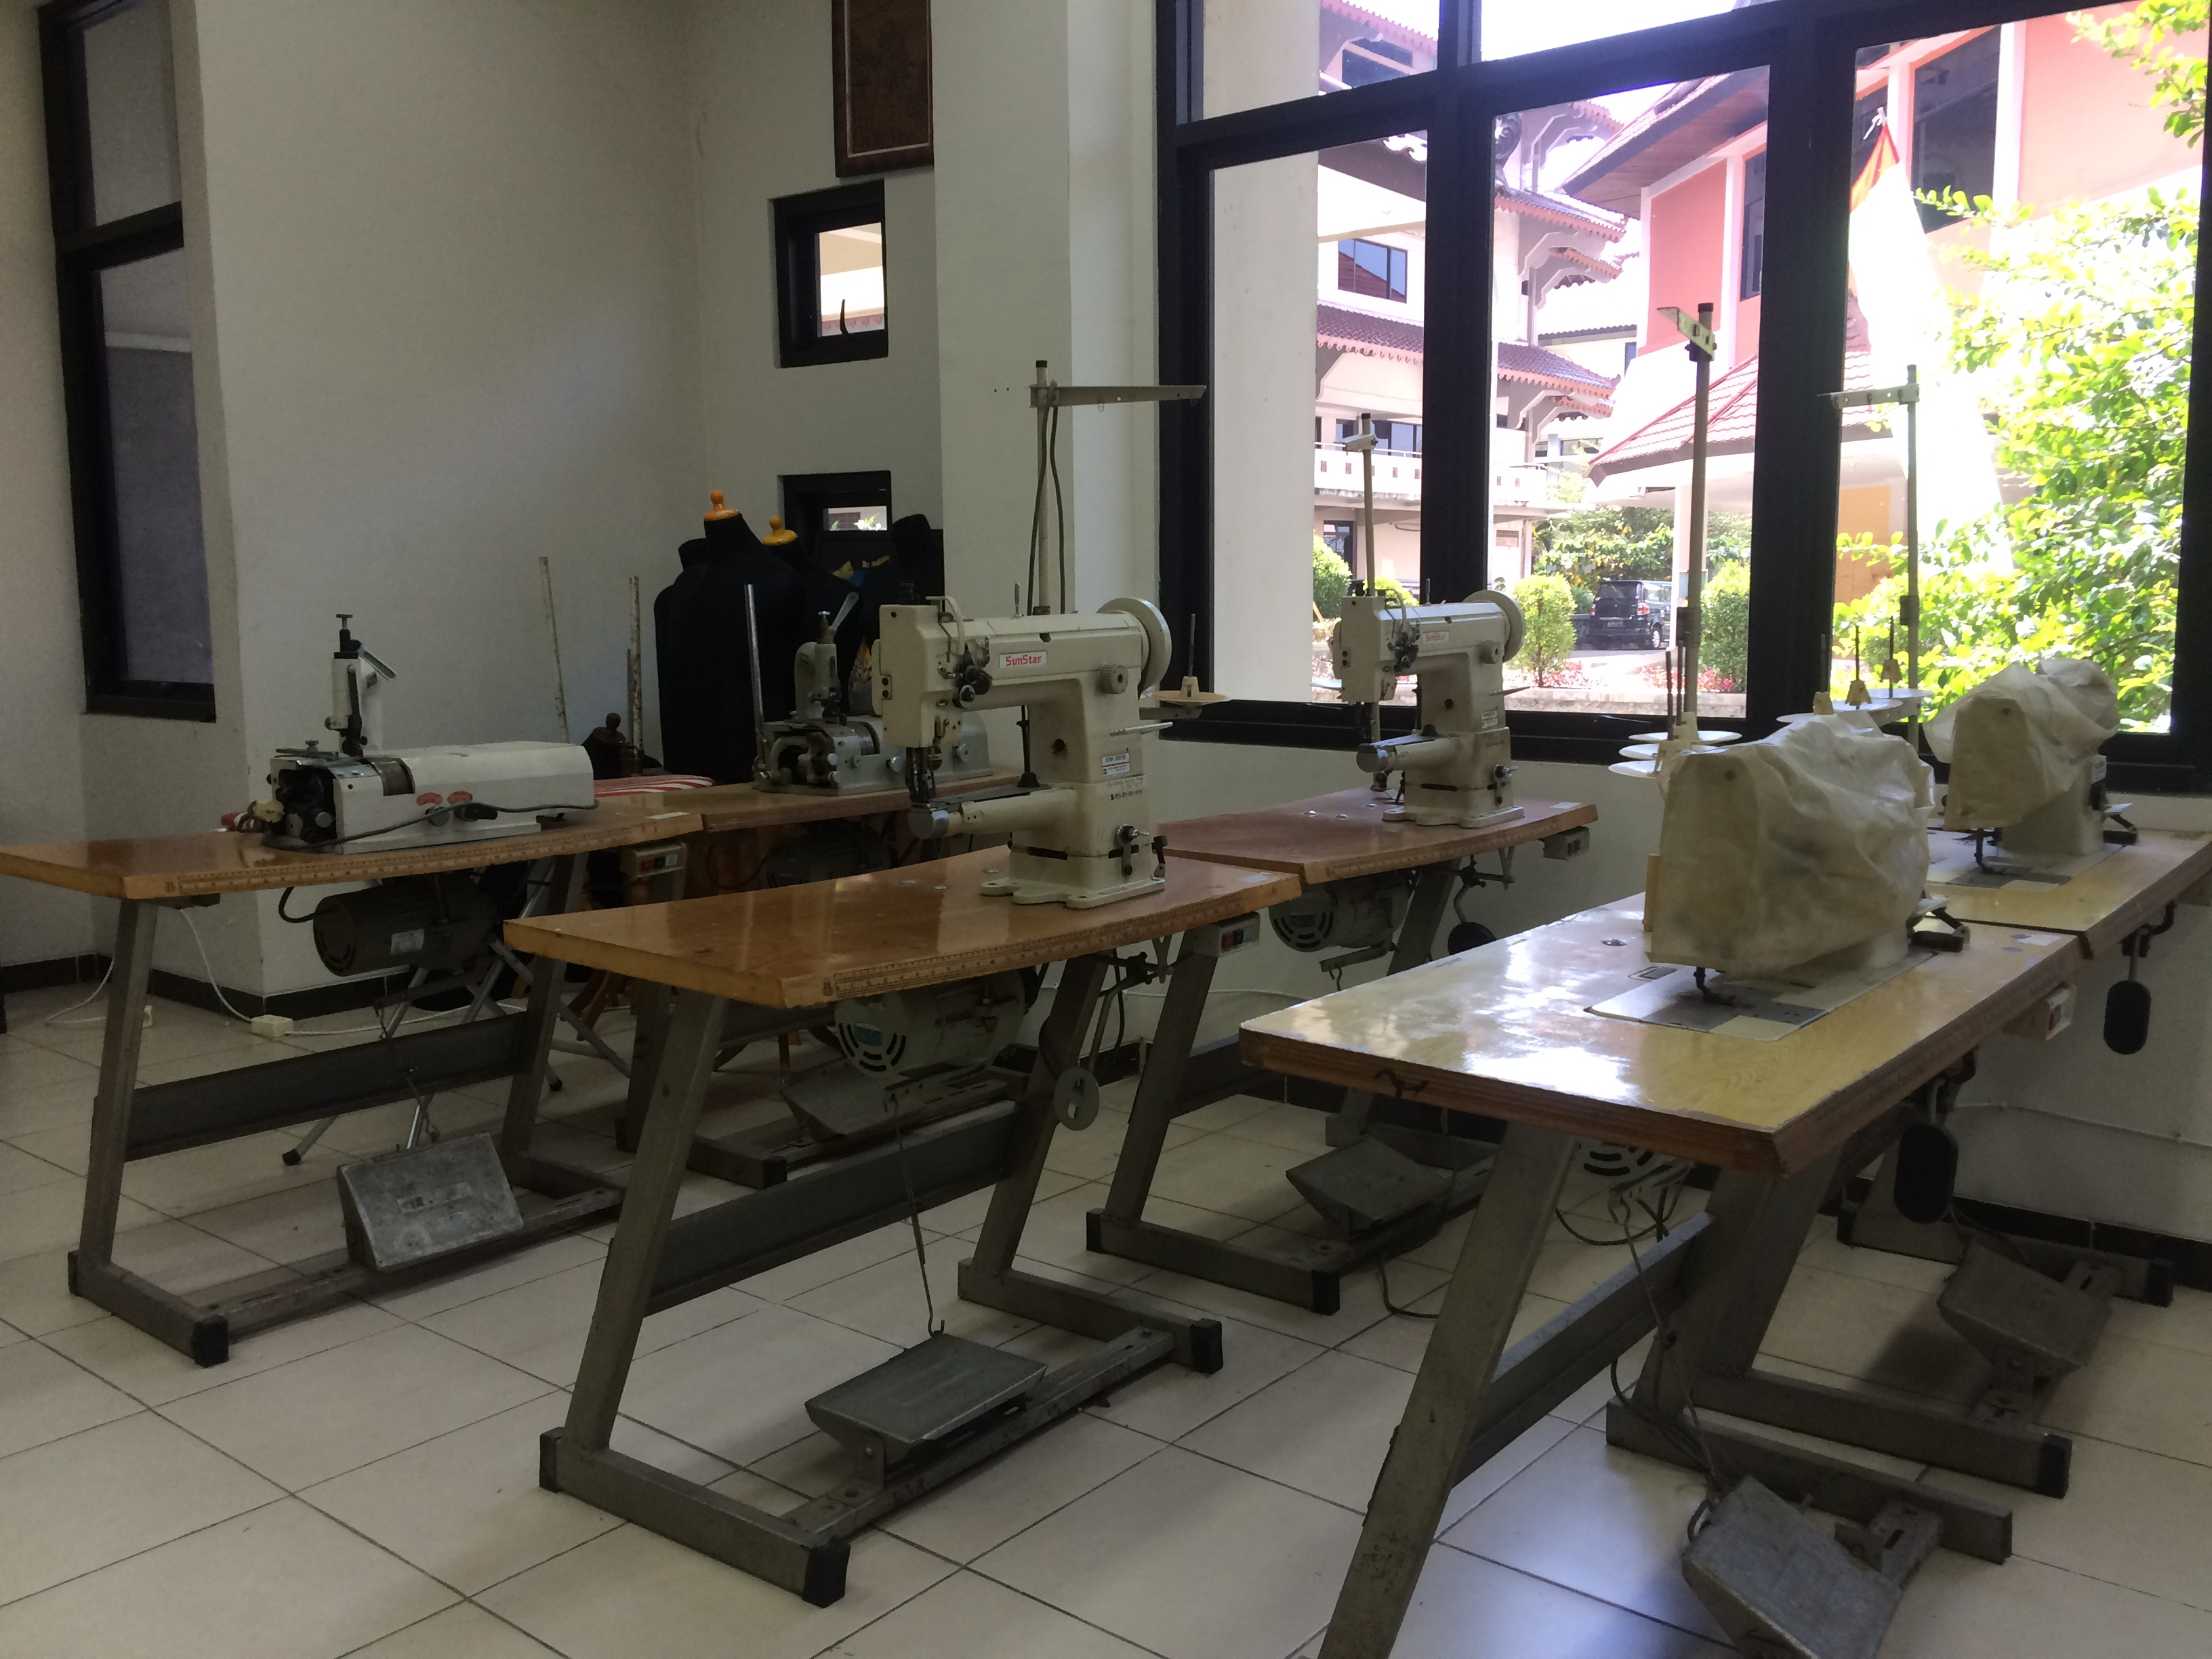 One of the classrooms/workshops for wayang construction at ISI Surakarta Campus II.